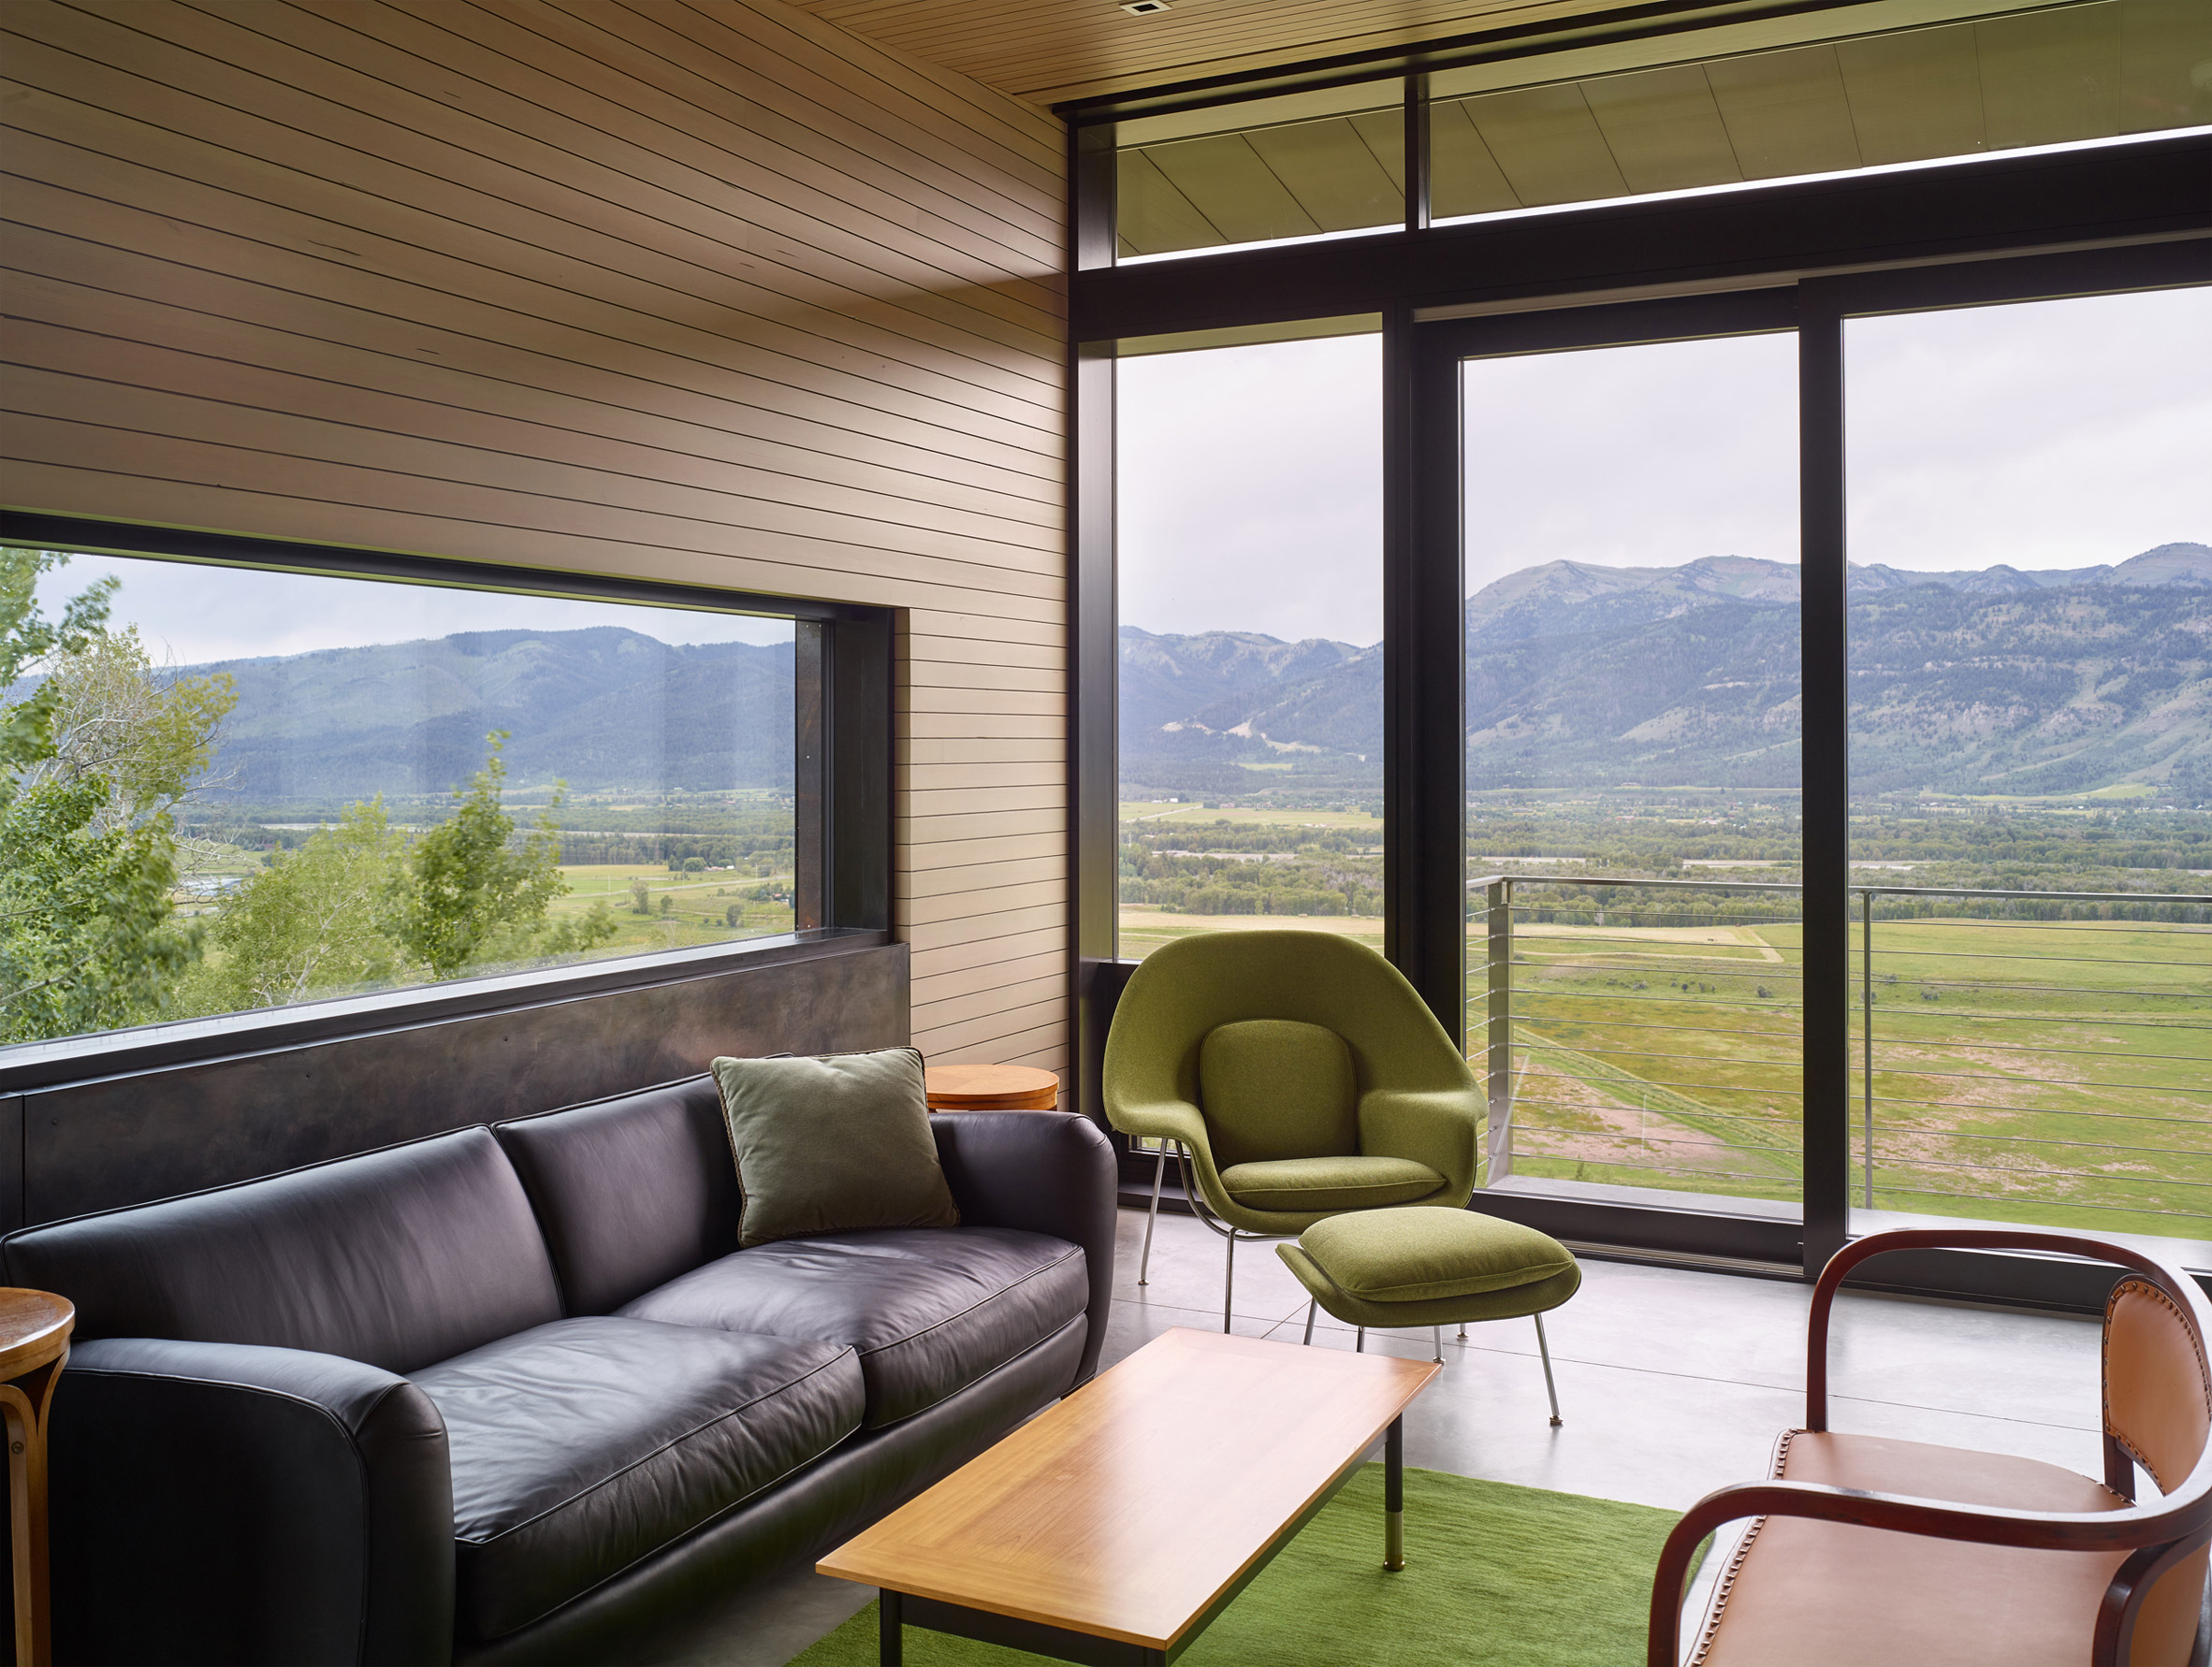 wyoming-residence-abramson-teiger-architects-architecture-residential_dezeen_2364_col_25